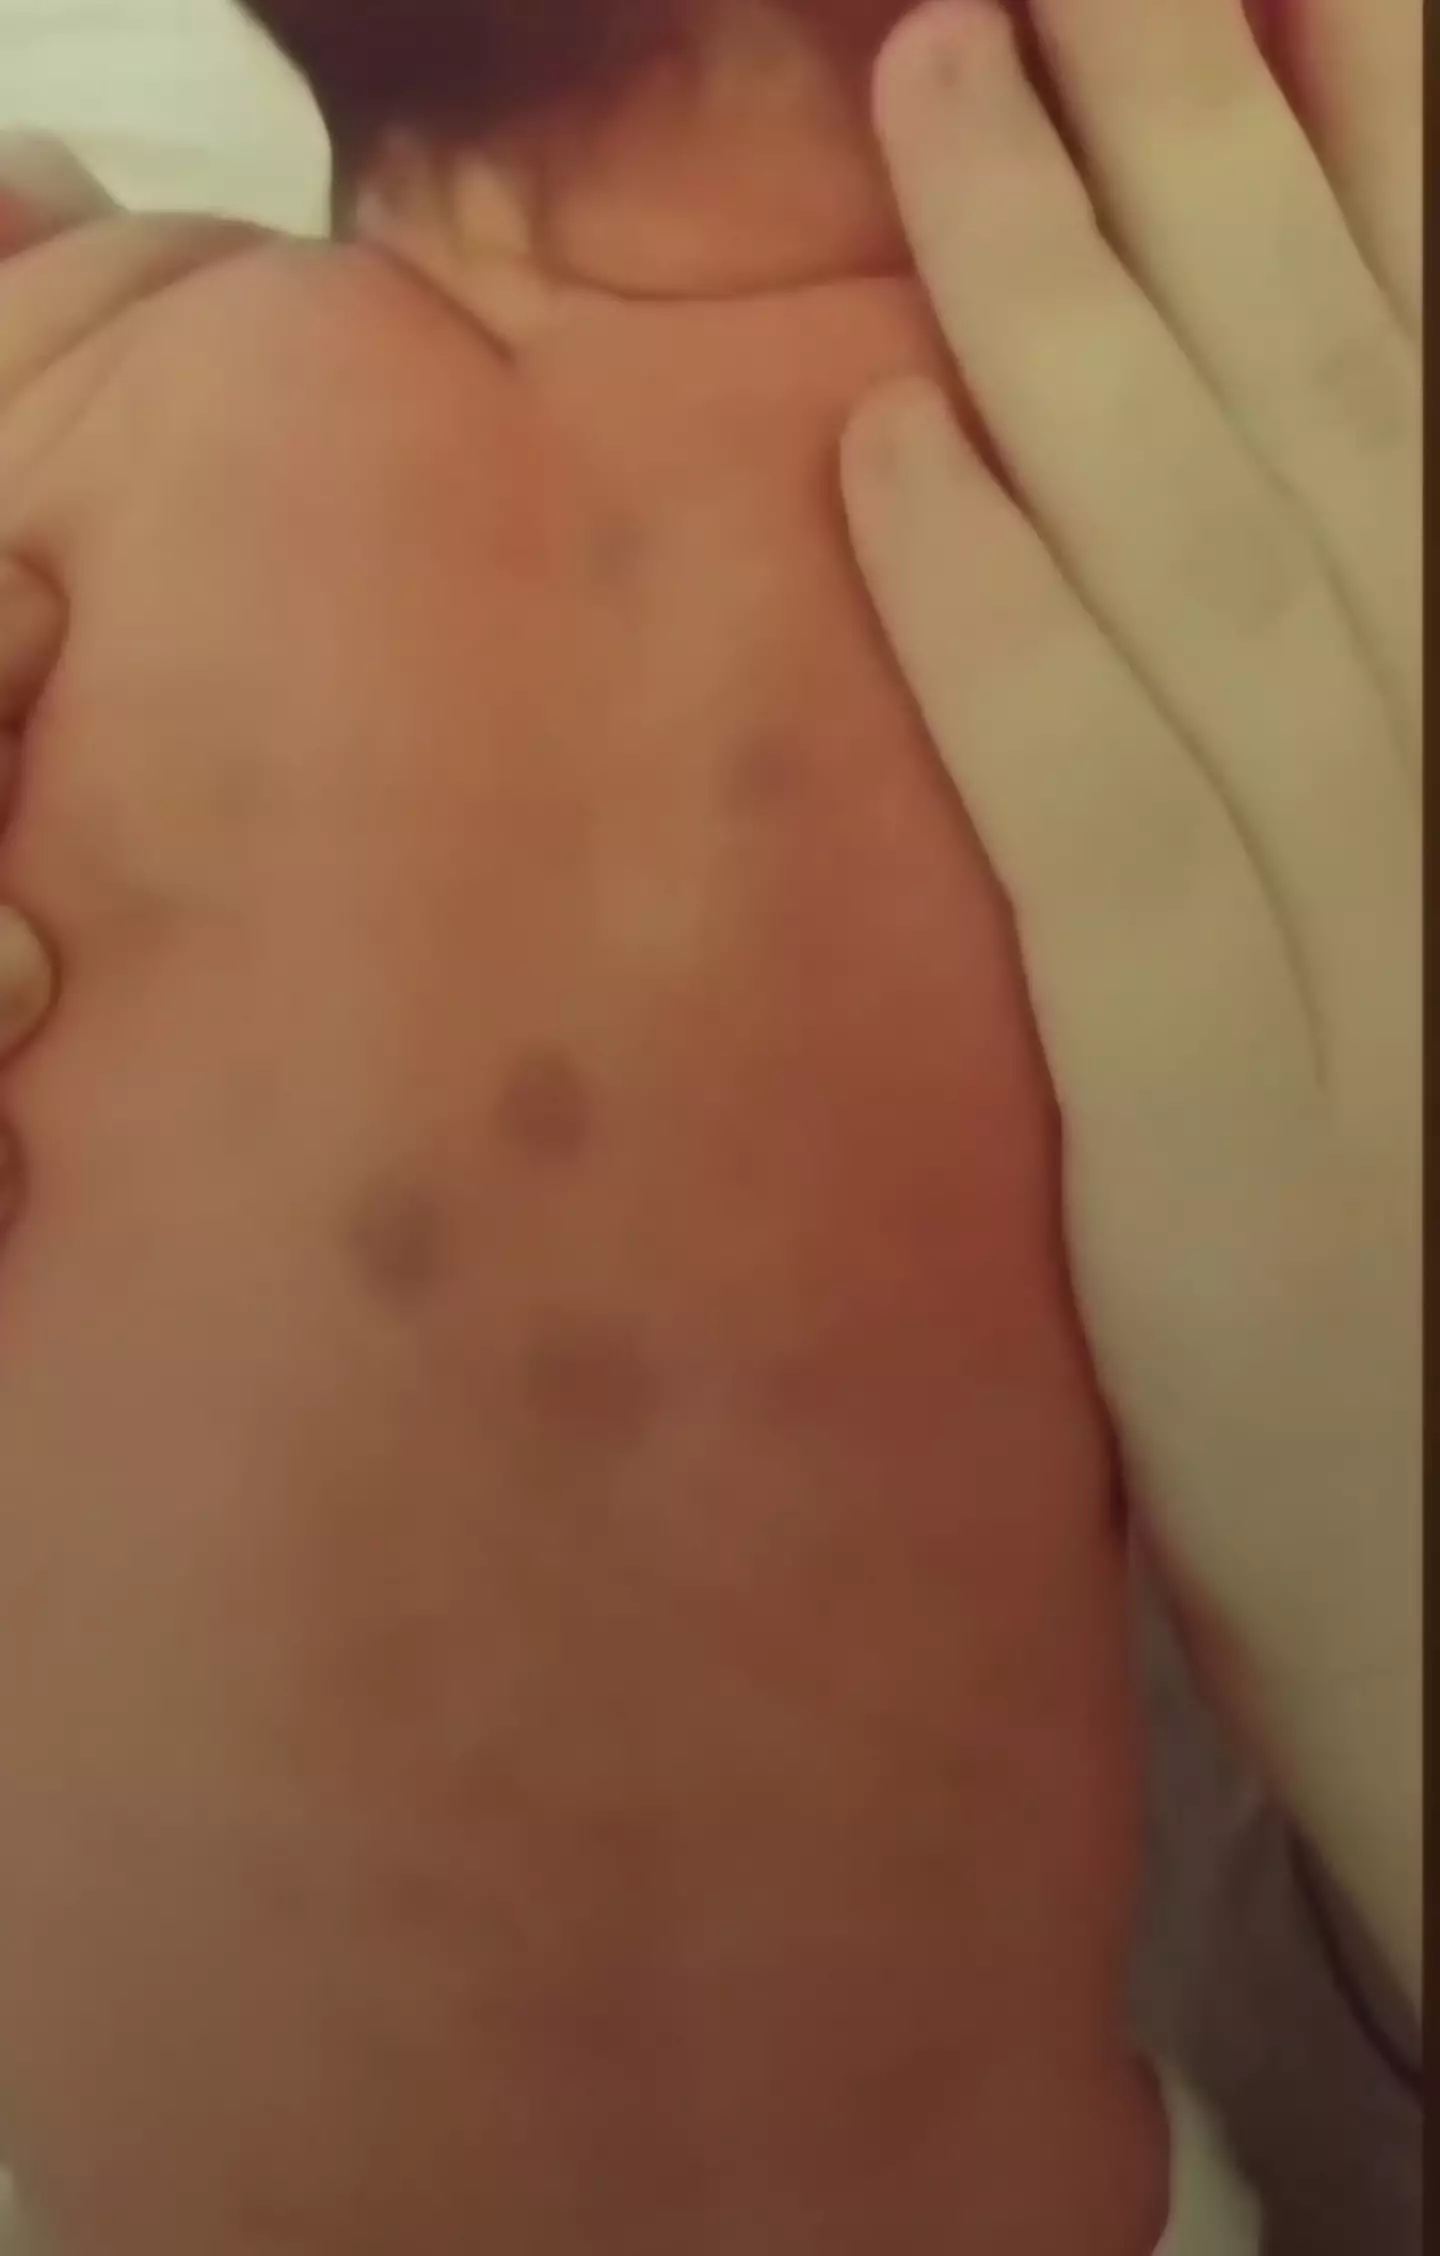 Amelia was born with purple spots across her body. (SWNS)